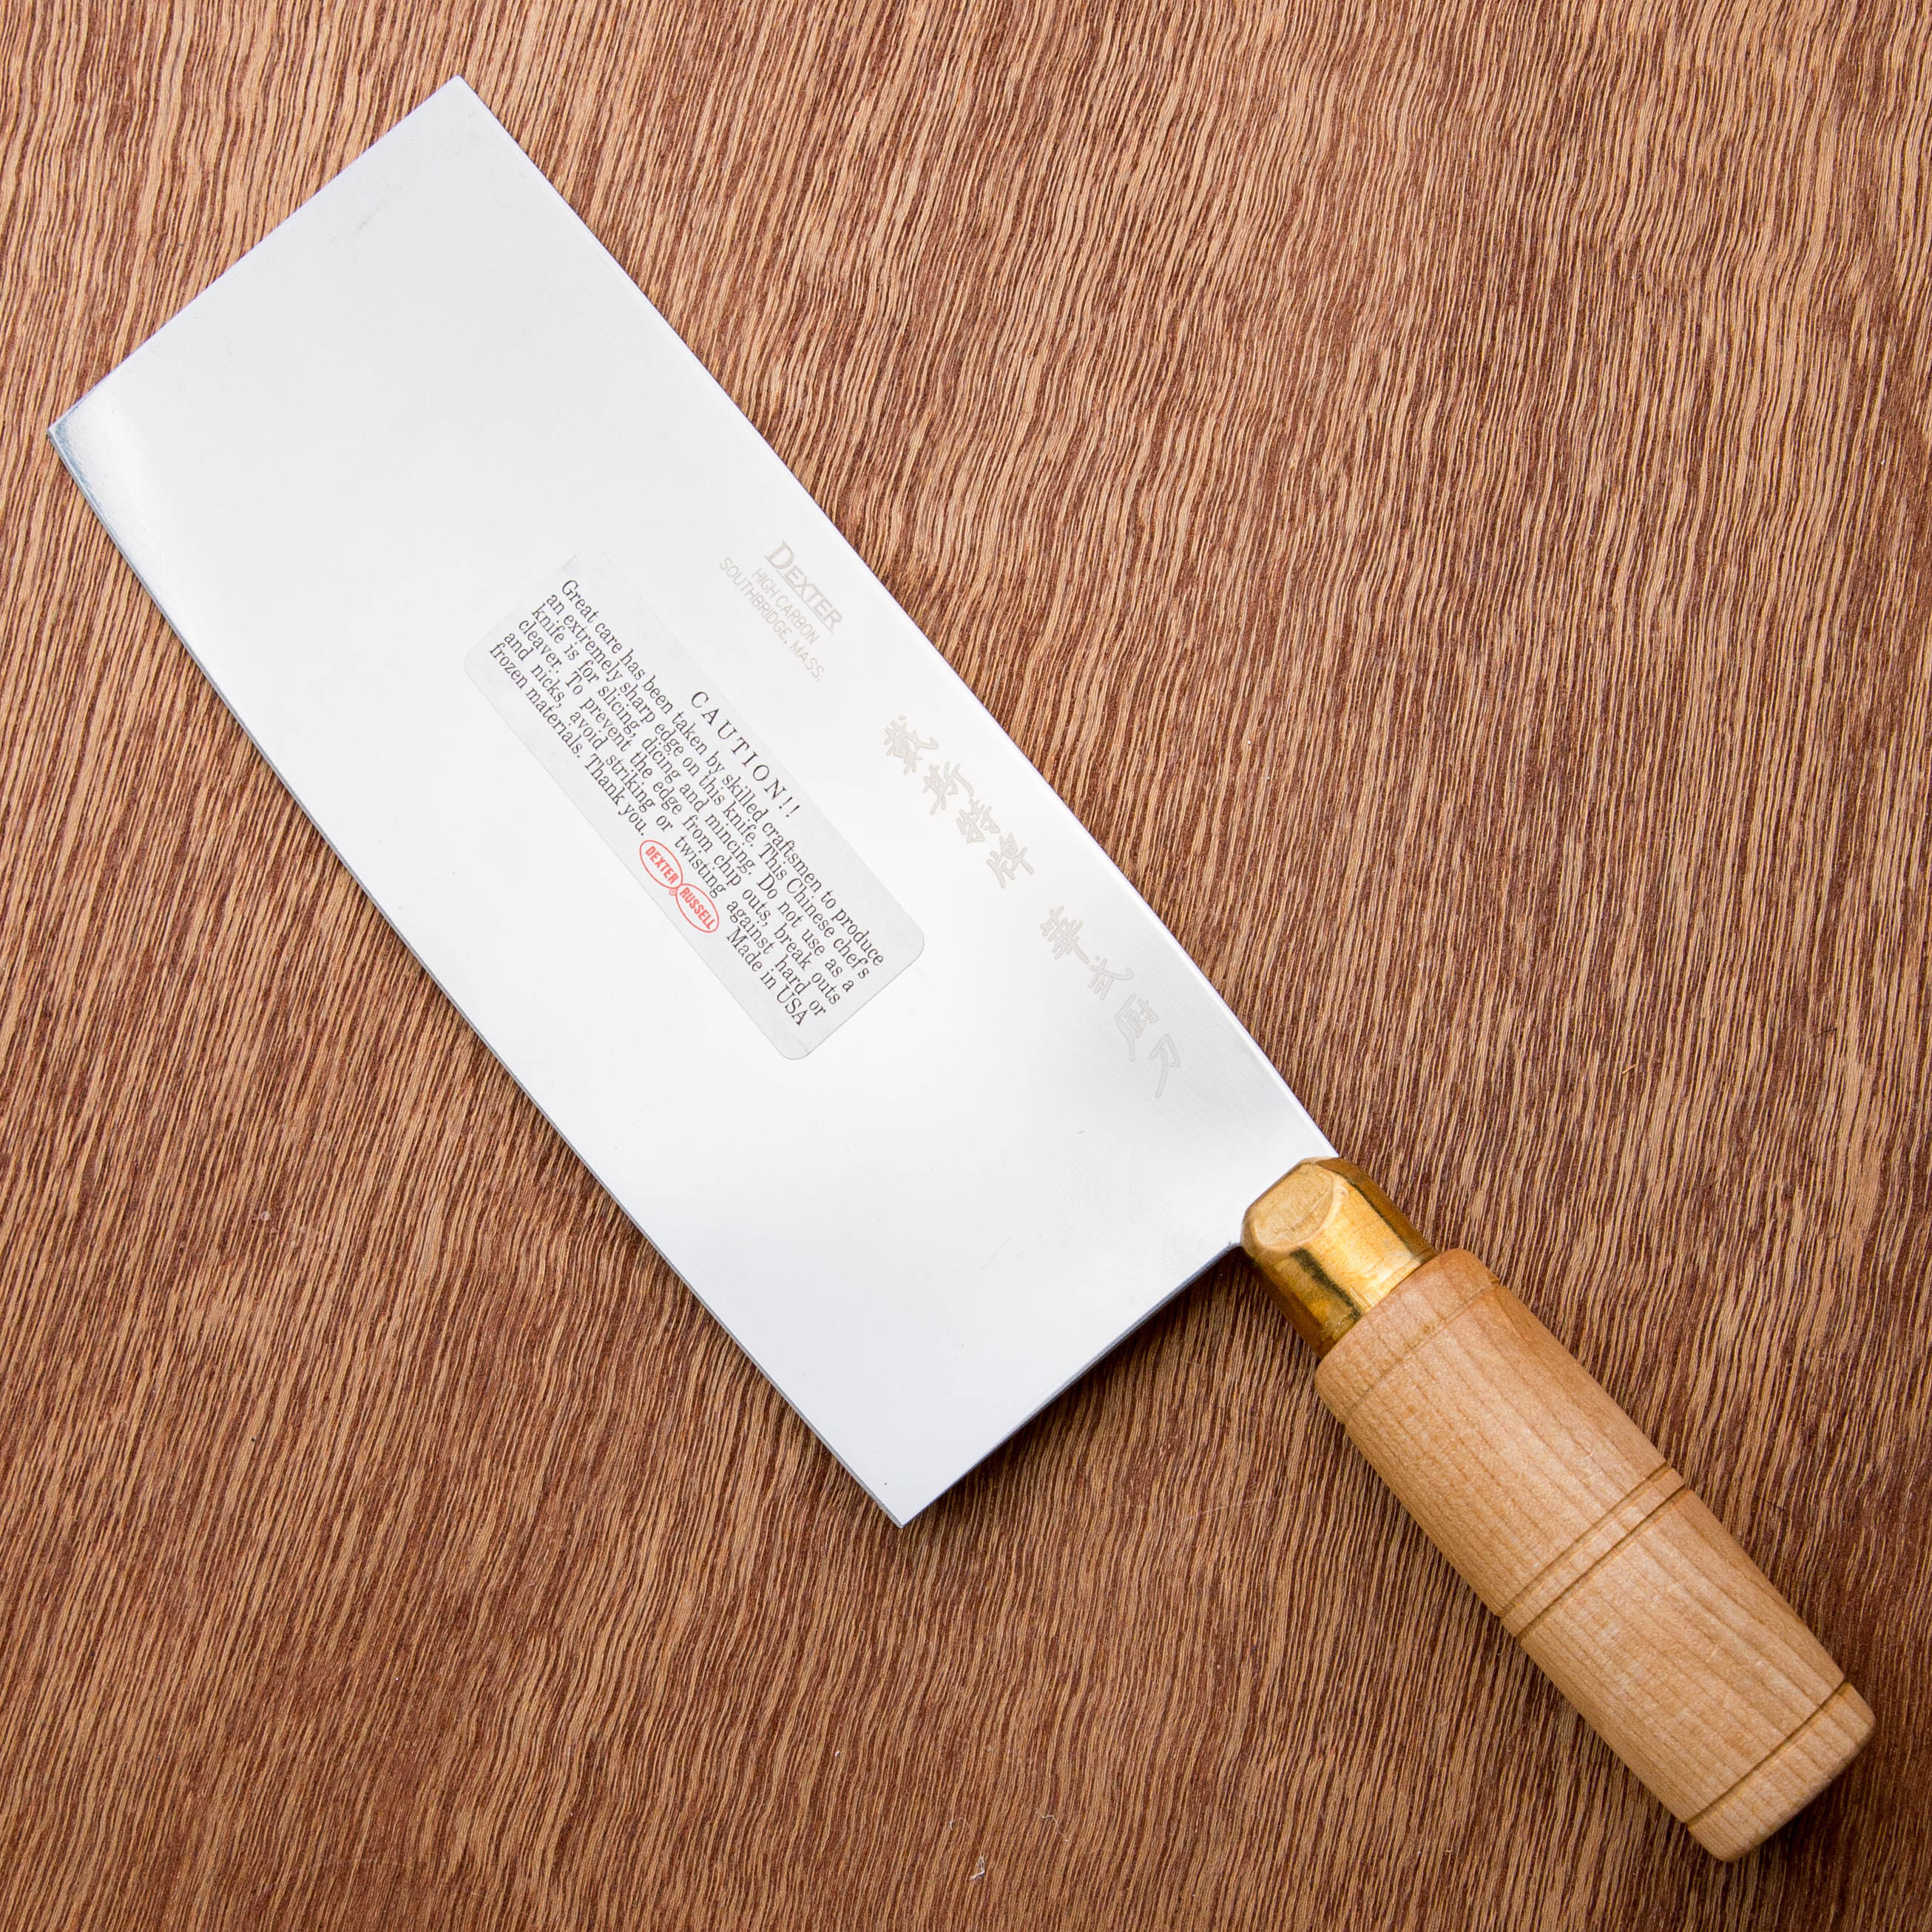 Dexter Russell 5178, 8-Inch Chinese Chef's Knife